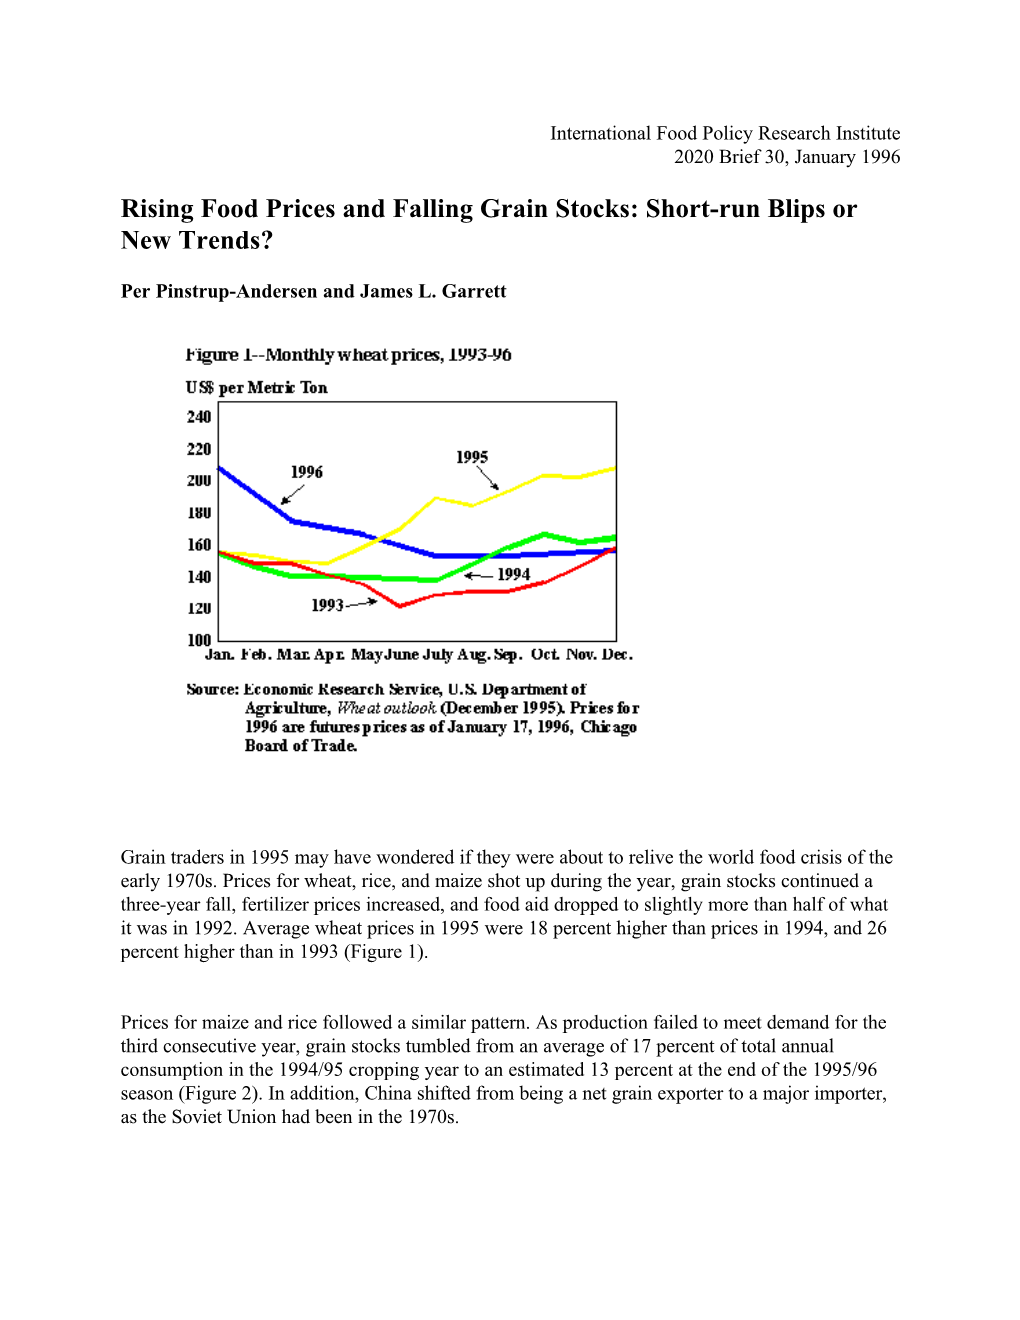 Rising Food Prices and Falling Grain Stocks: Short-Run Blips Or New Trends?